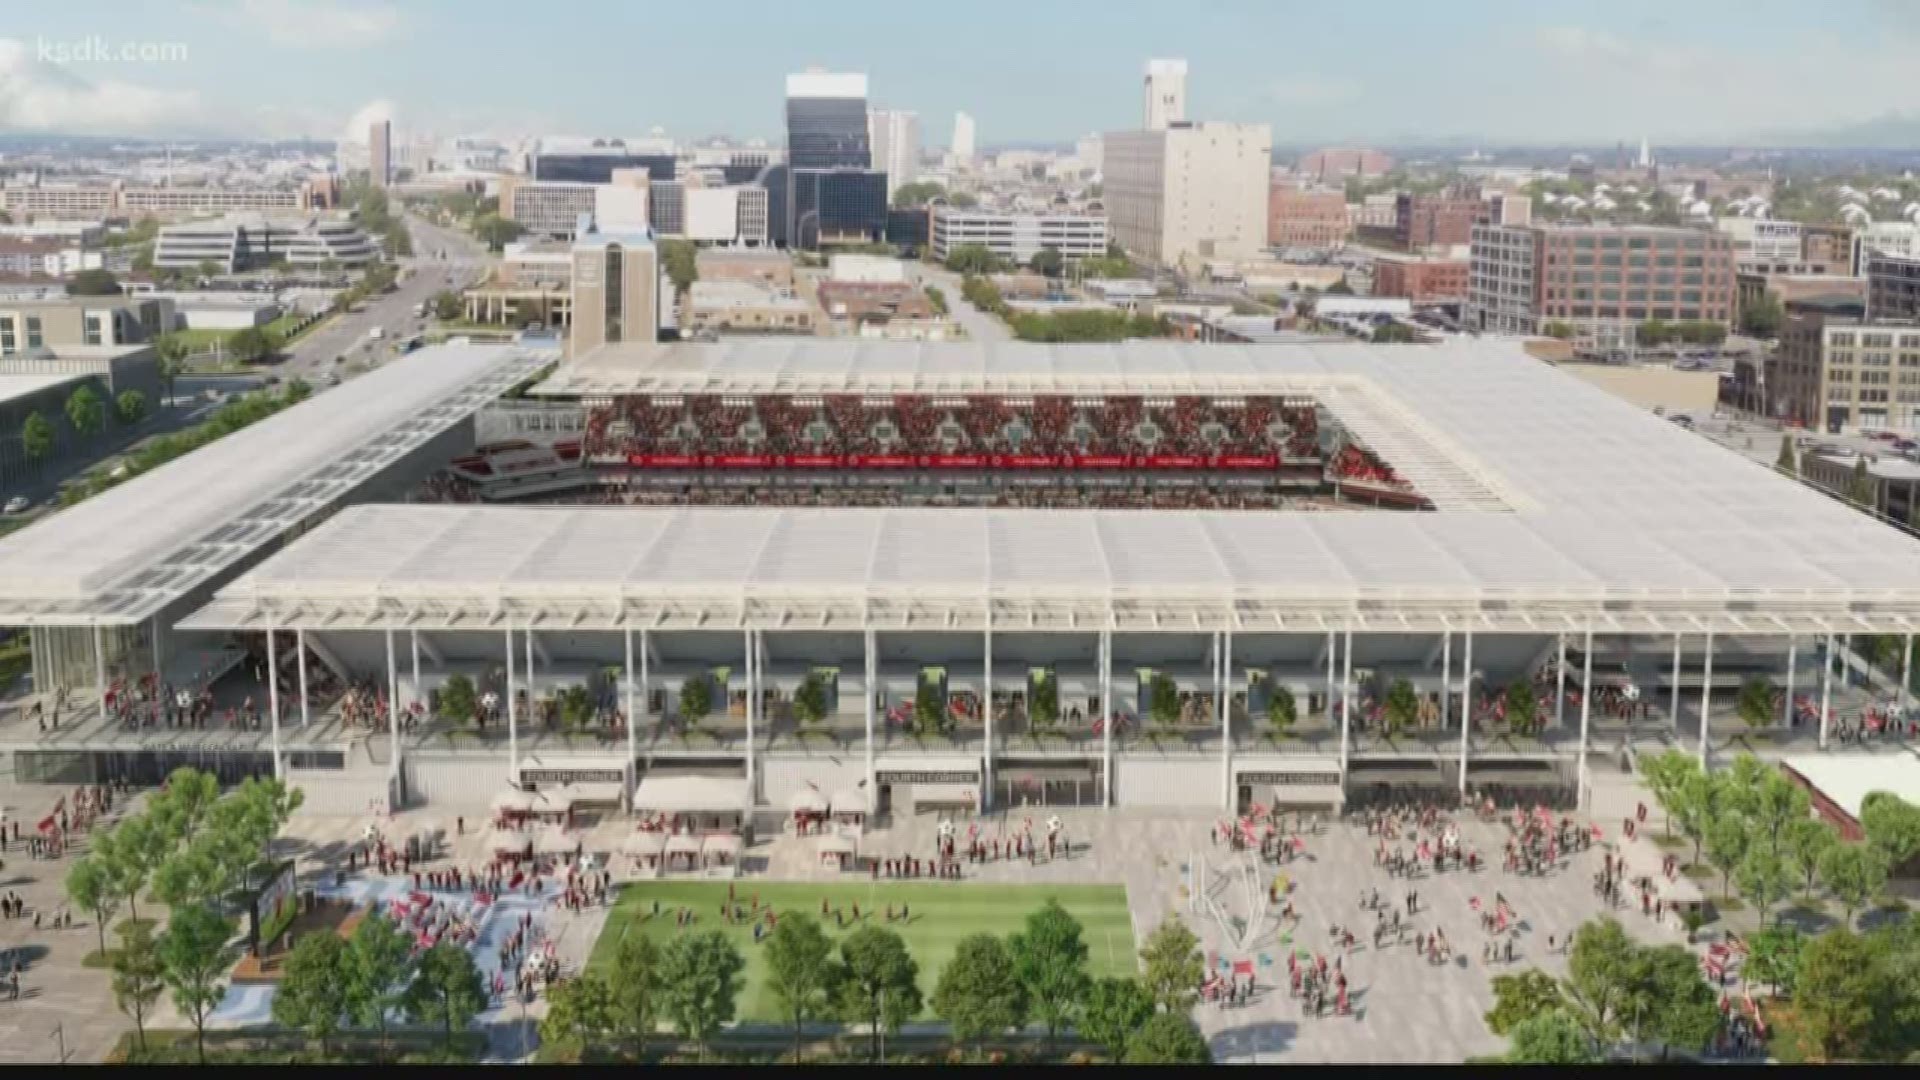 The proposed MLS stadium will now expand north of Market between 20th and 22nd Streets.